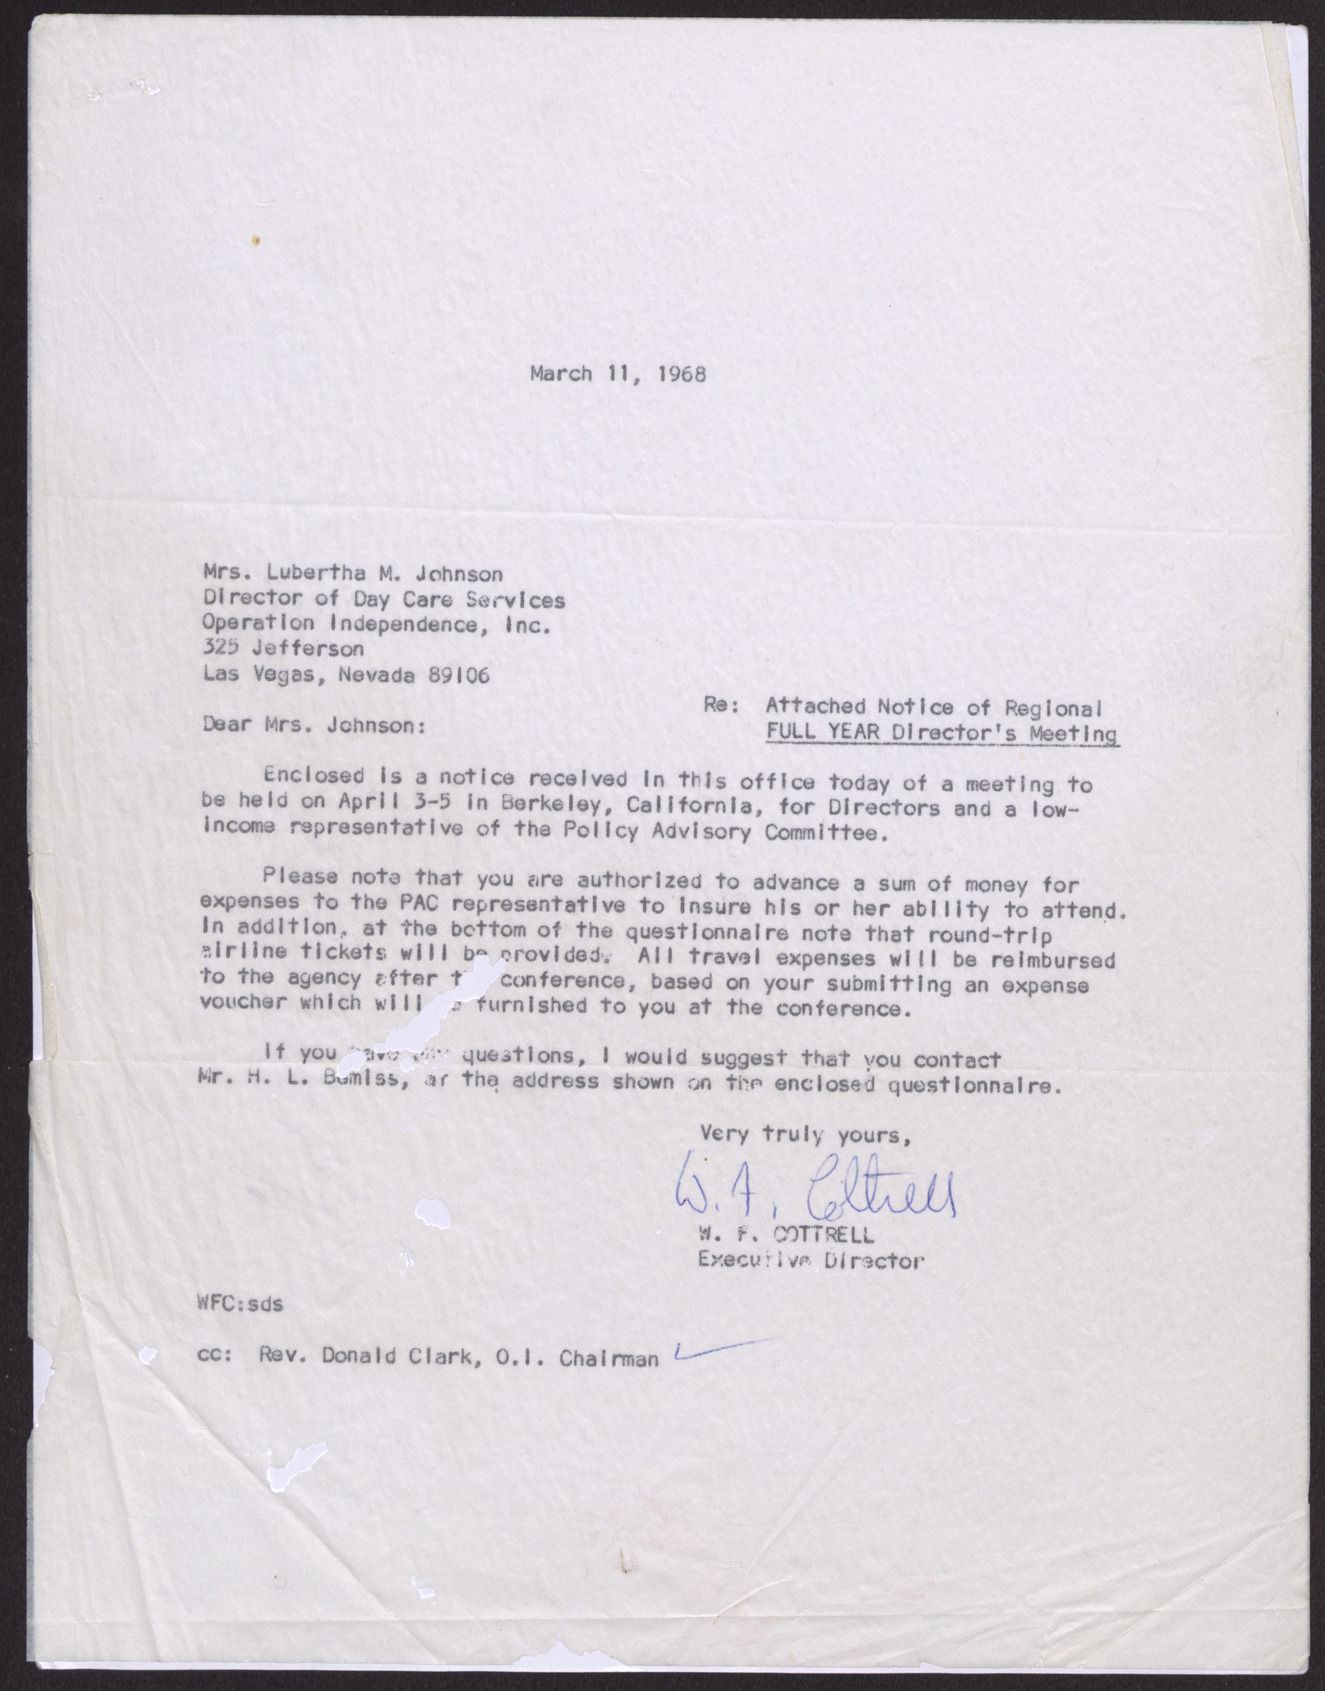 Letter to Mrs. Lubertha M. Johnson from W. F. Cottrell, March 11, 1968